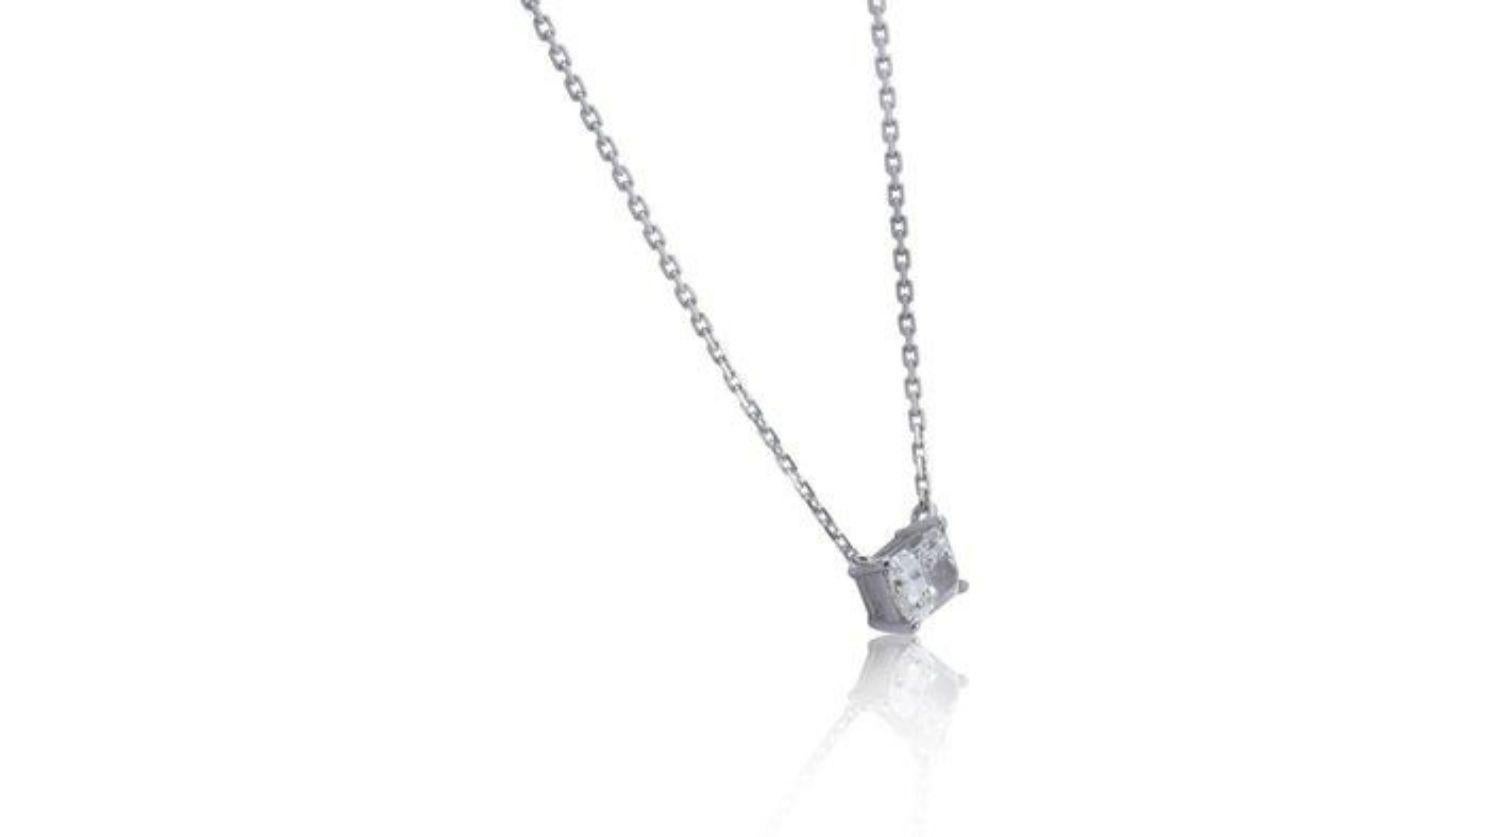 Radiant Cut Radiant 0.90ct Solitaire Diamond Necklace set in 18K White Gold For Sale